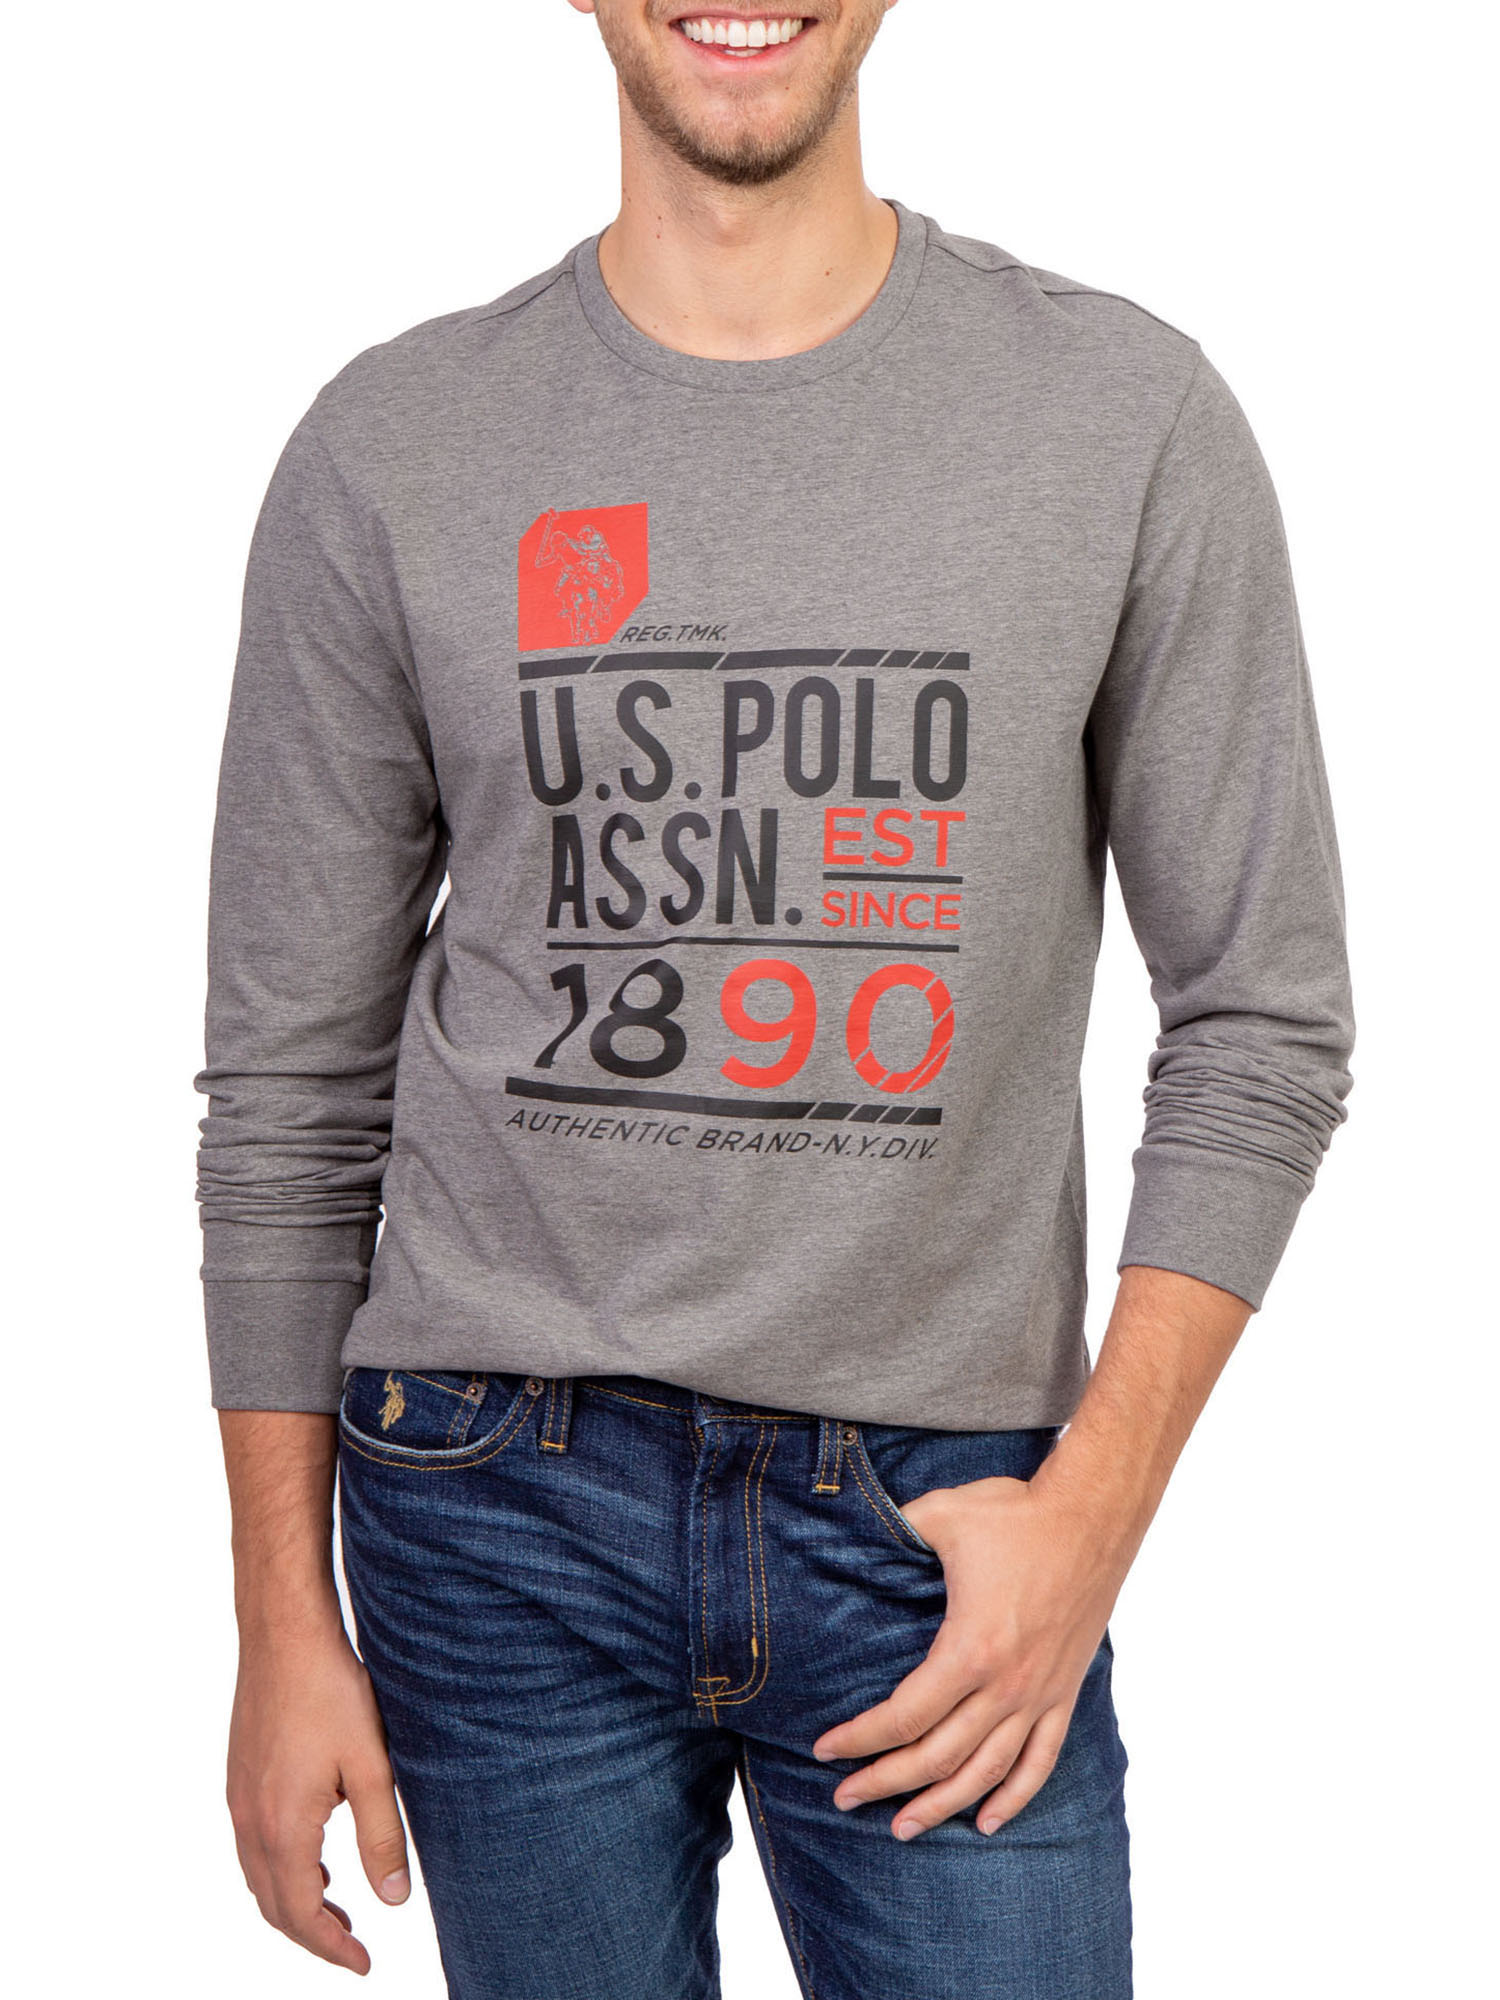 U.S. Polo Assn. Men's and Big Men's Long Sleeve Graphic T-Shirt - image 1 of 3